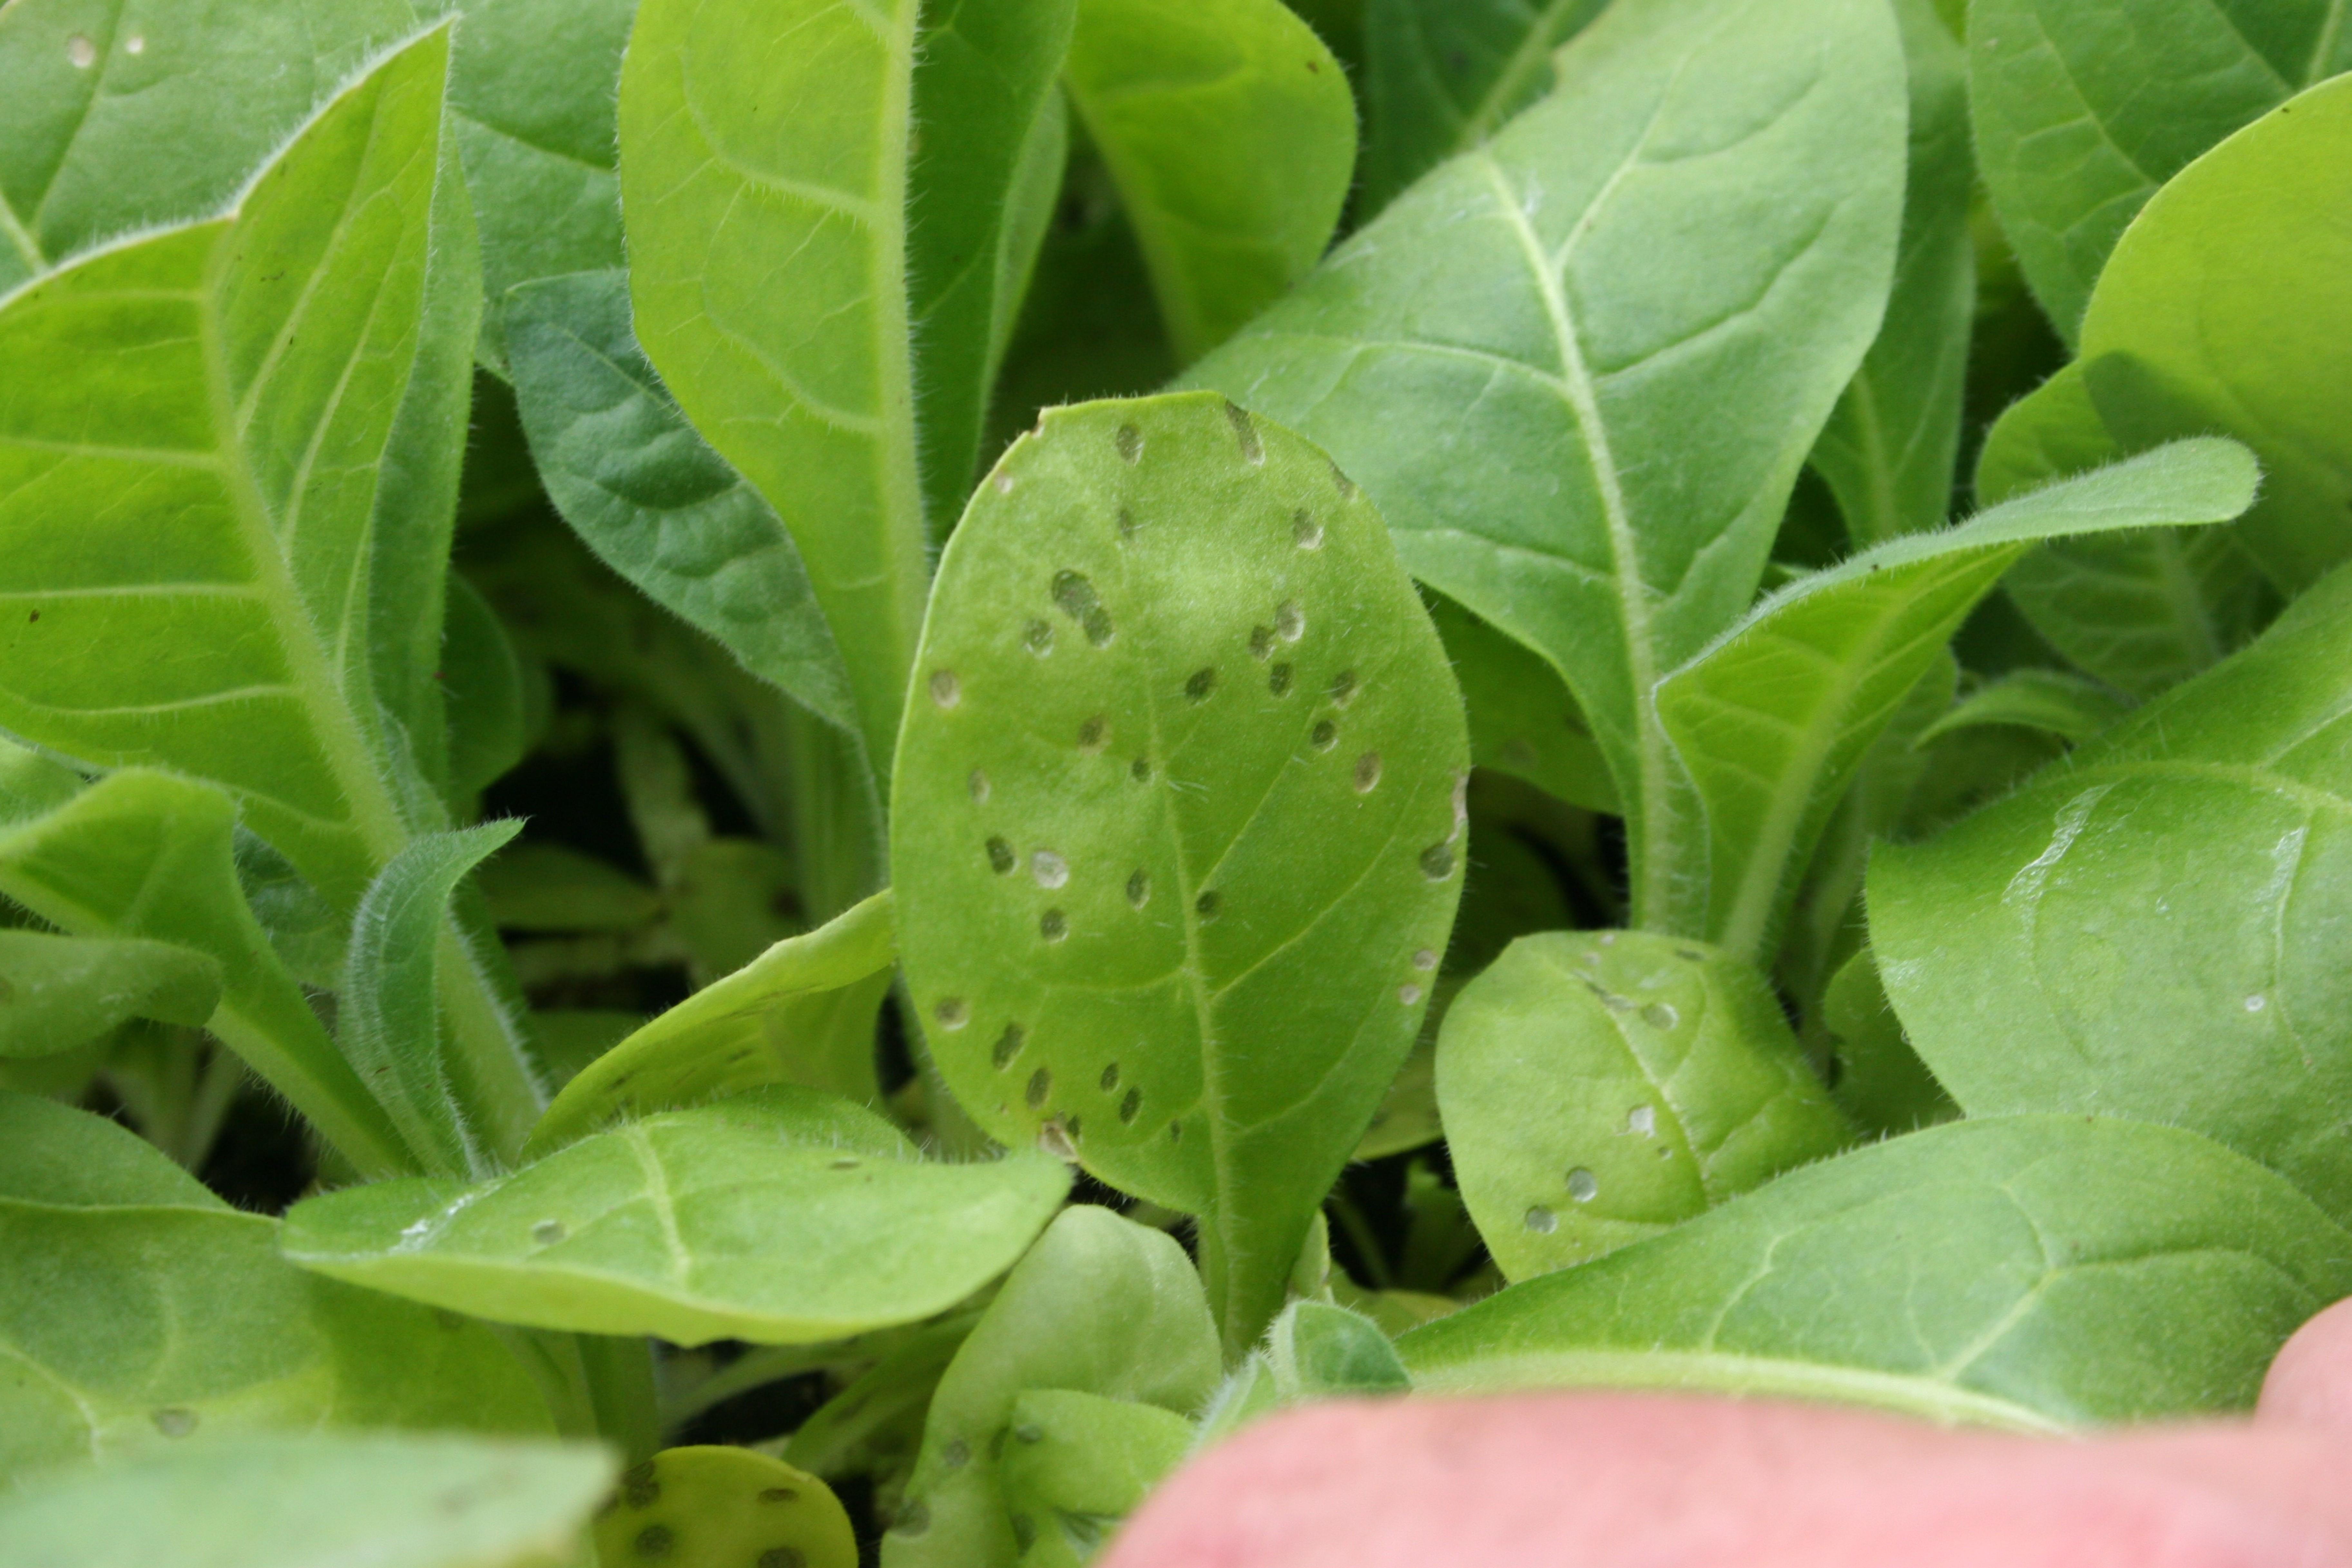 Target spot is caused by the sexual stage of the soil-borne fungus, Rhizoctonia solani.  Symptoms begin as small, water-soaked lesions on foliage. (Photo: Kenneth Seebold, UK)